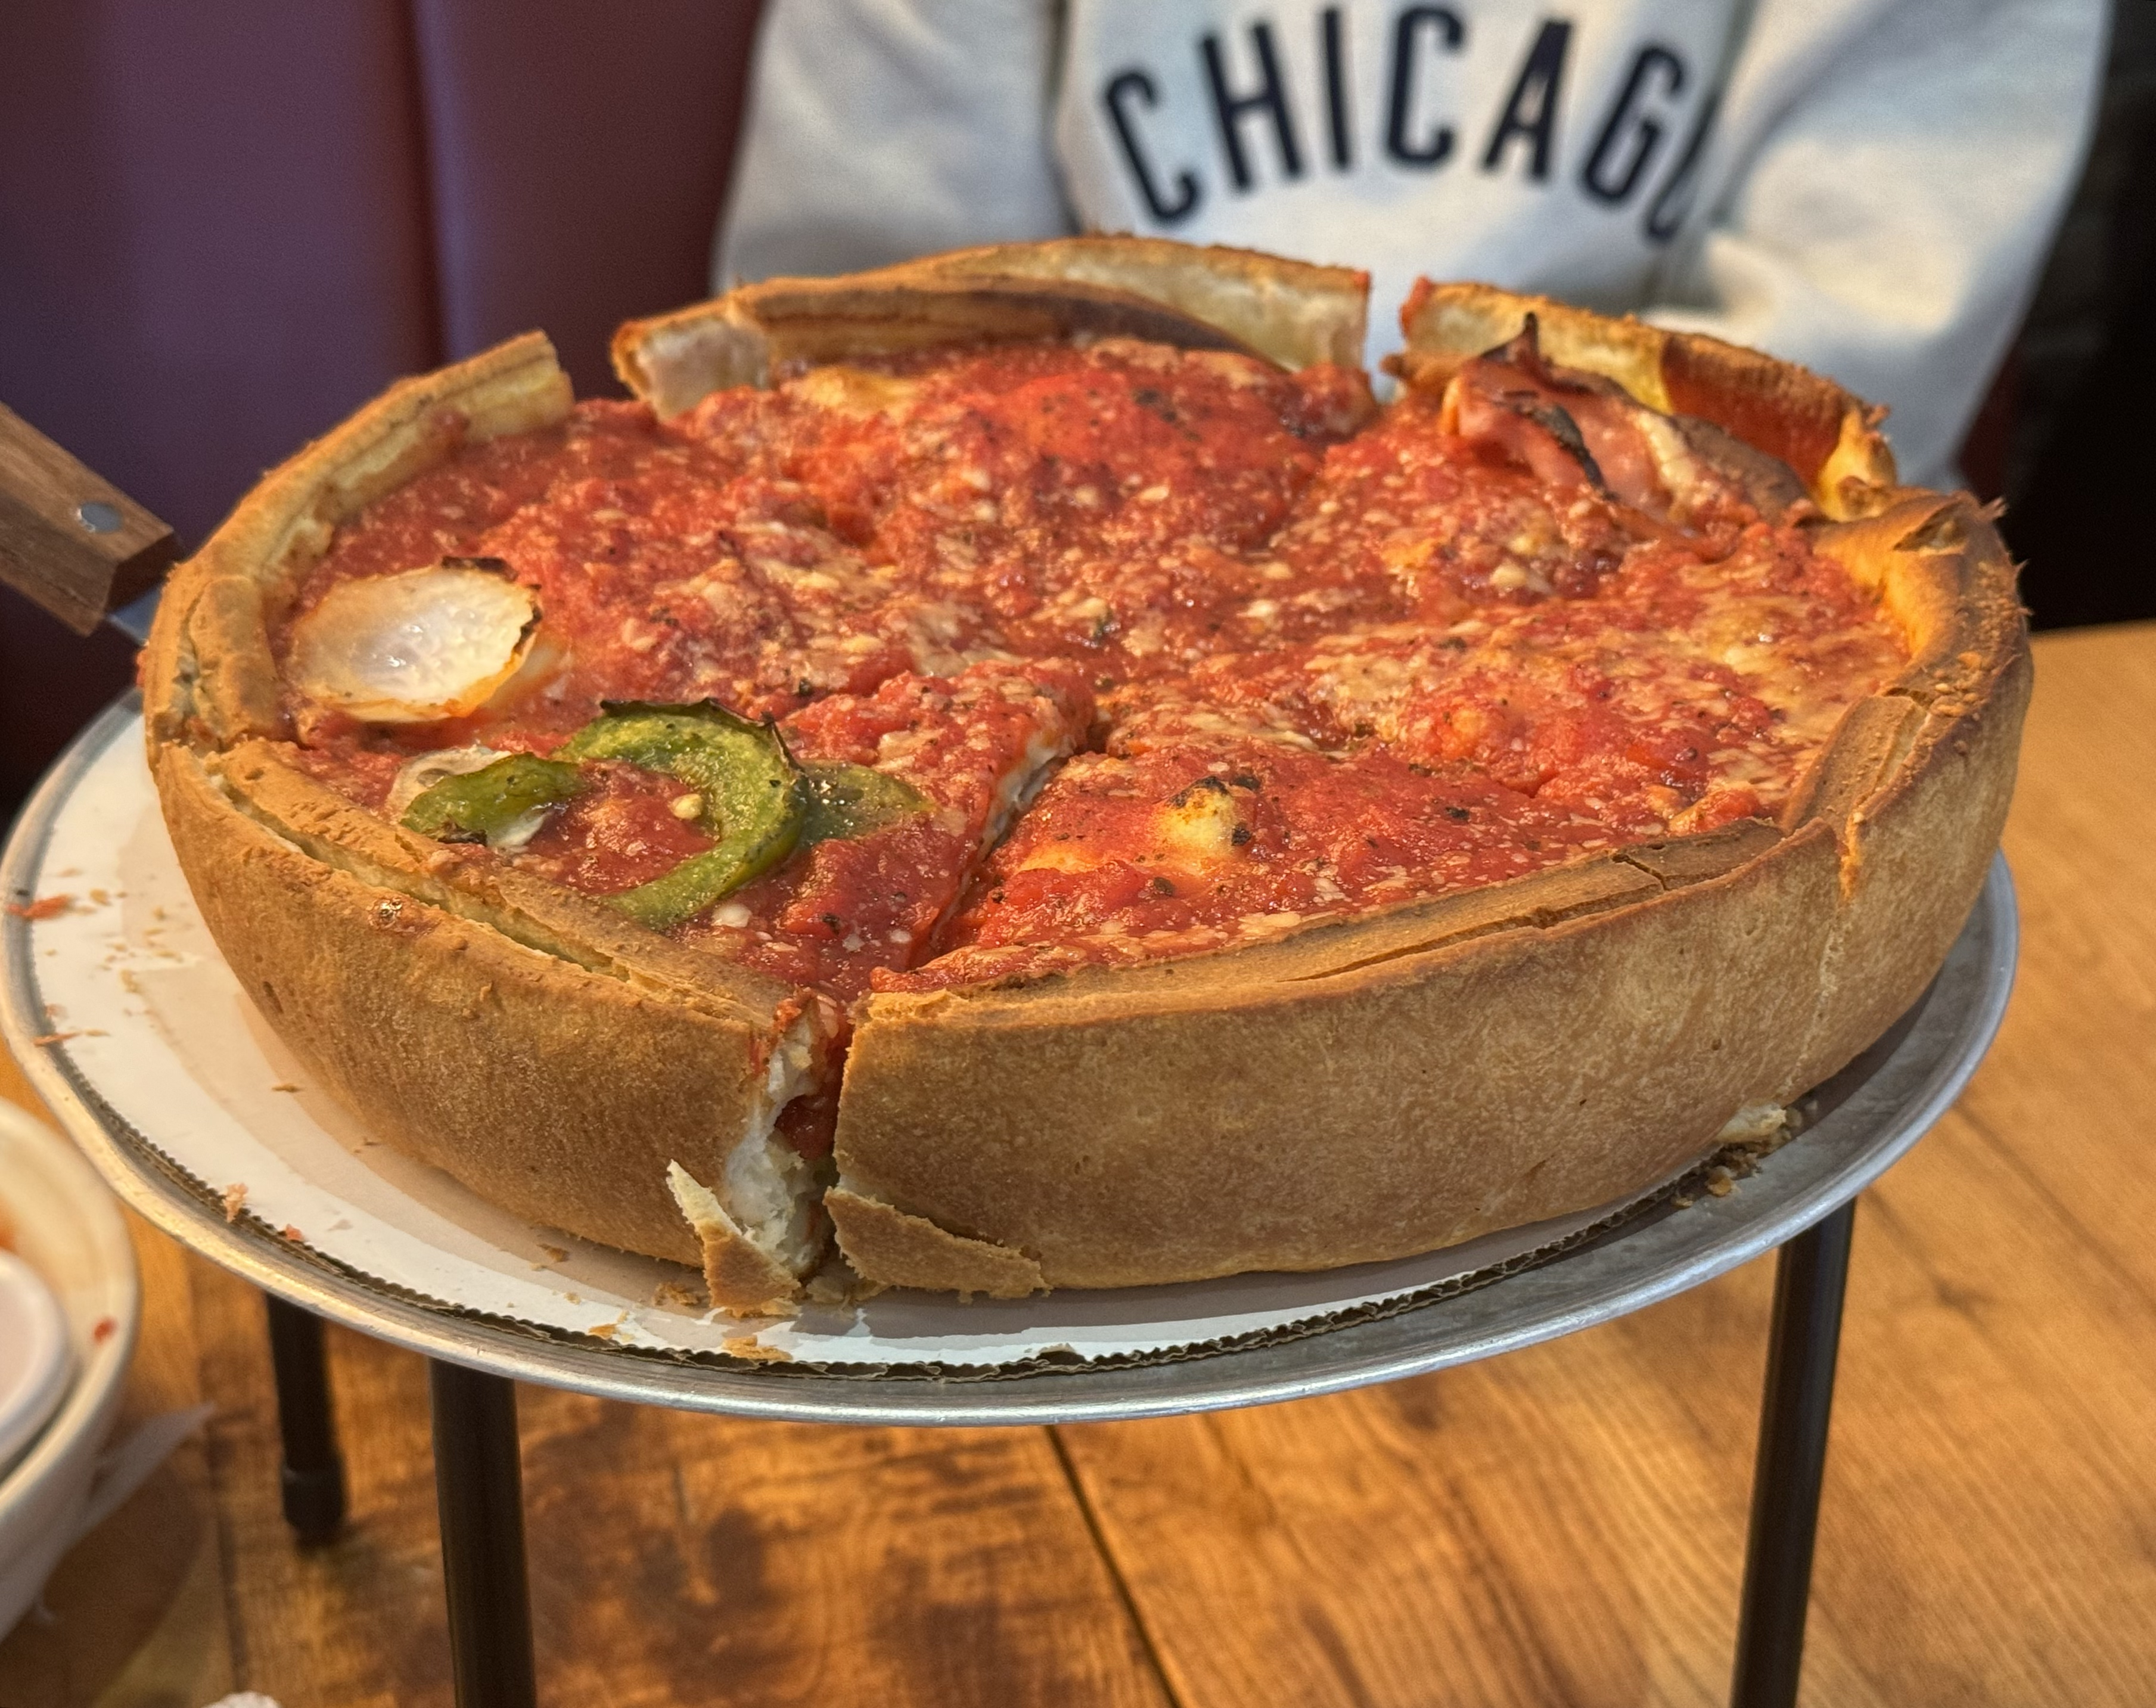 Chicago-style deep dish pizza at Giordano's in Chicago